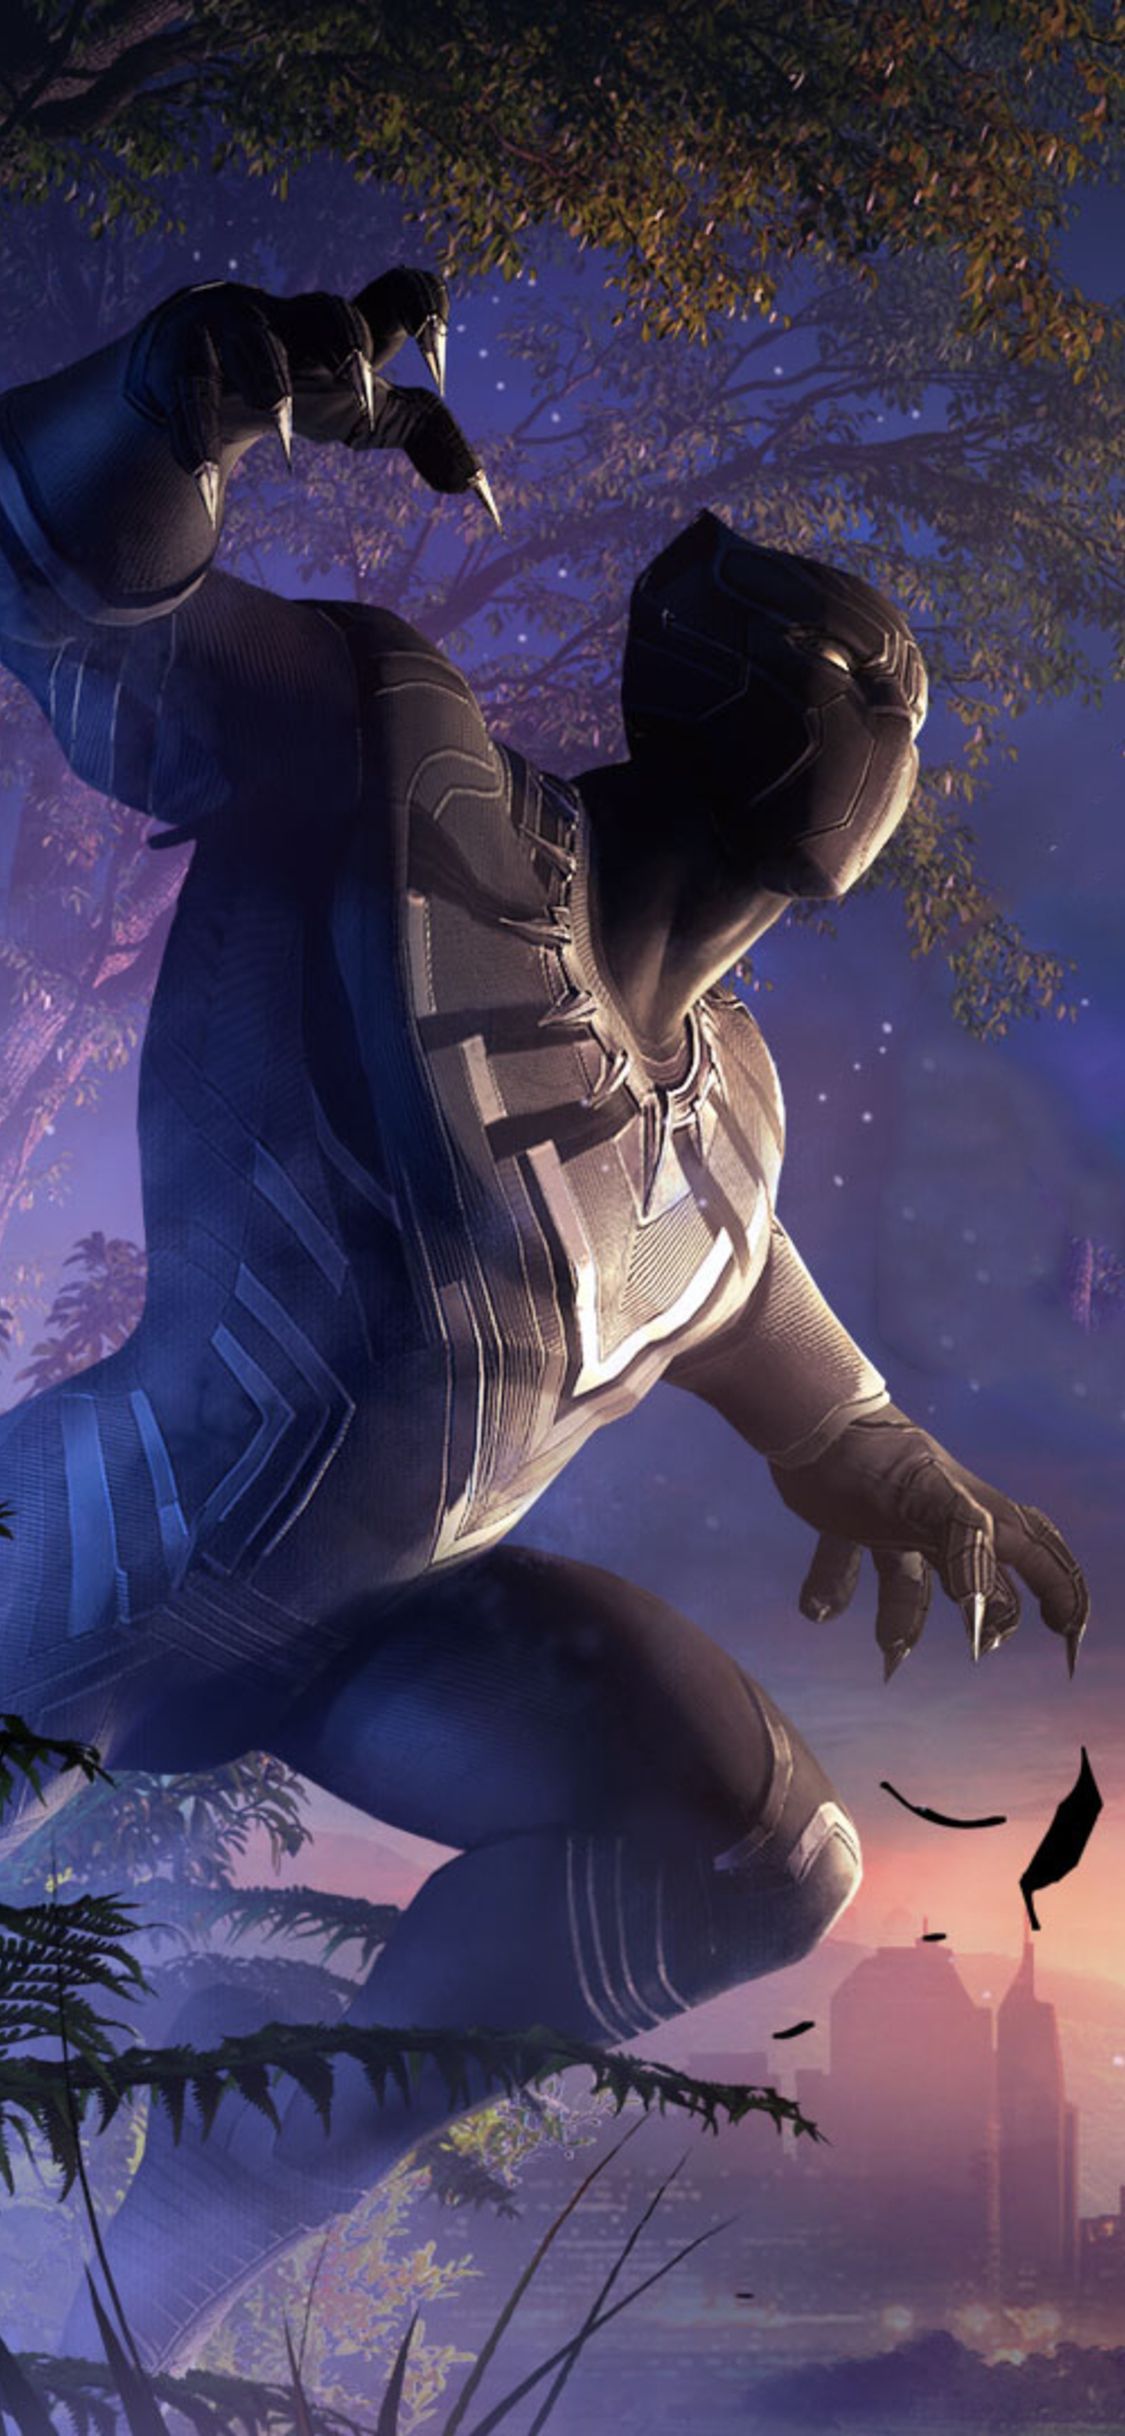 Black Panther And Erik Killmonger Marvel Contest Of Champions iPhone XS, iPhone iPhone X. Marvel comics wallpaper, Black panther, Black panther image